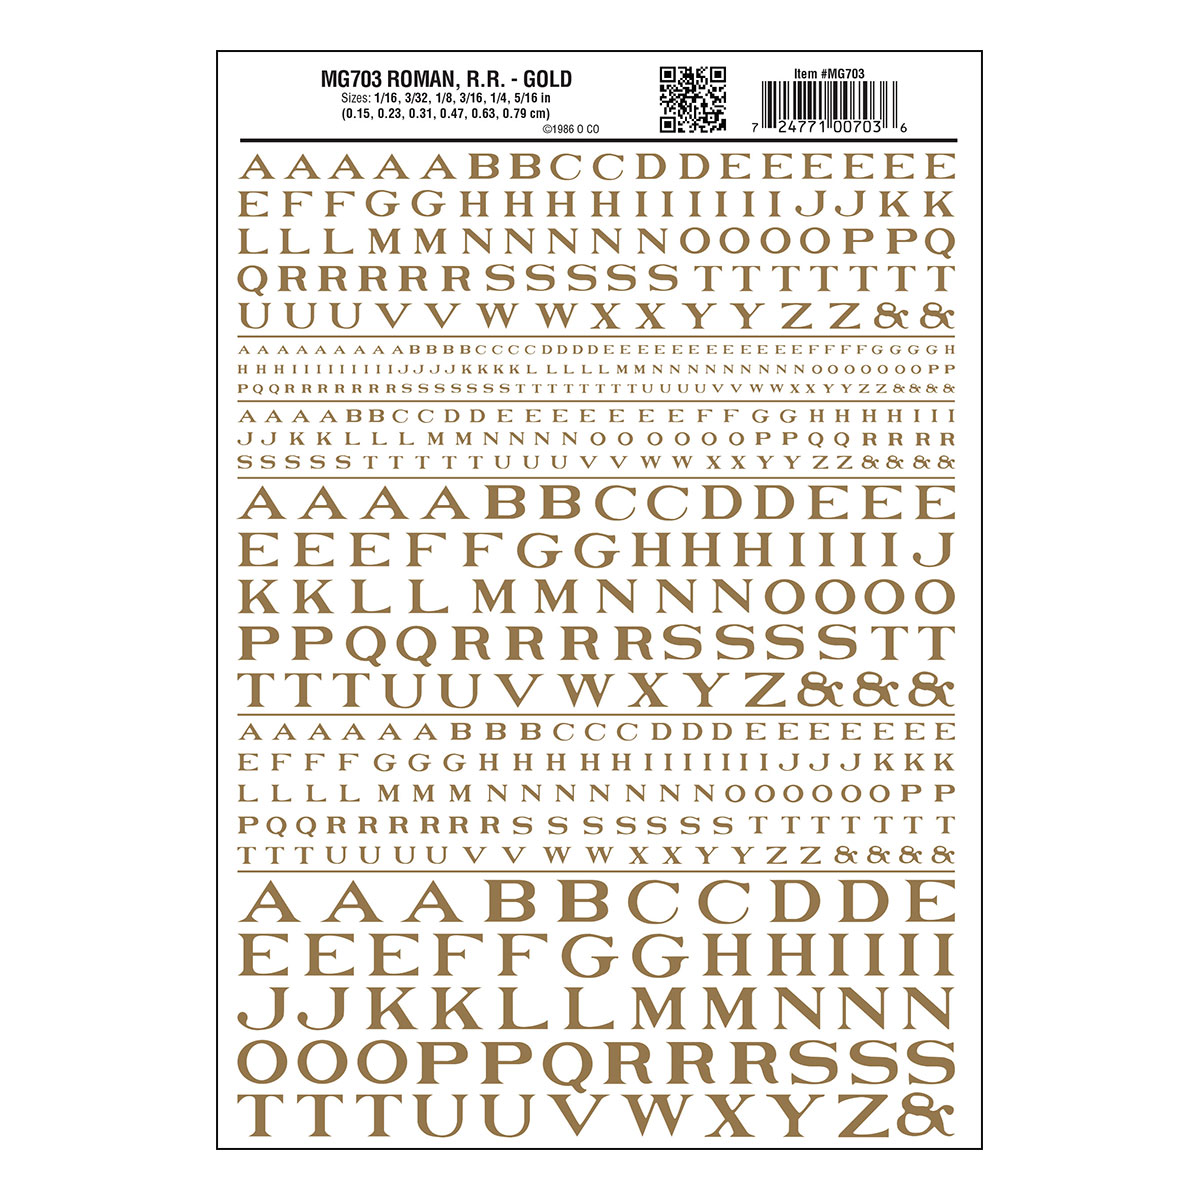 NEW Woodland Train Decal Sheet Roman R.R Letters White 1/16-5/16" MG702